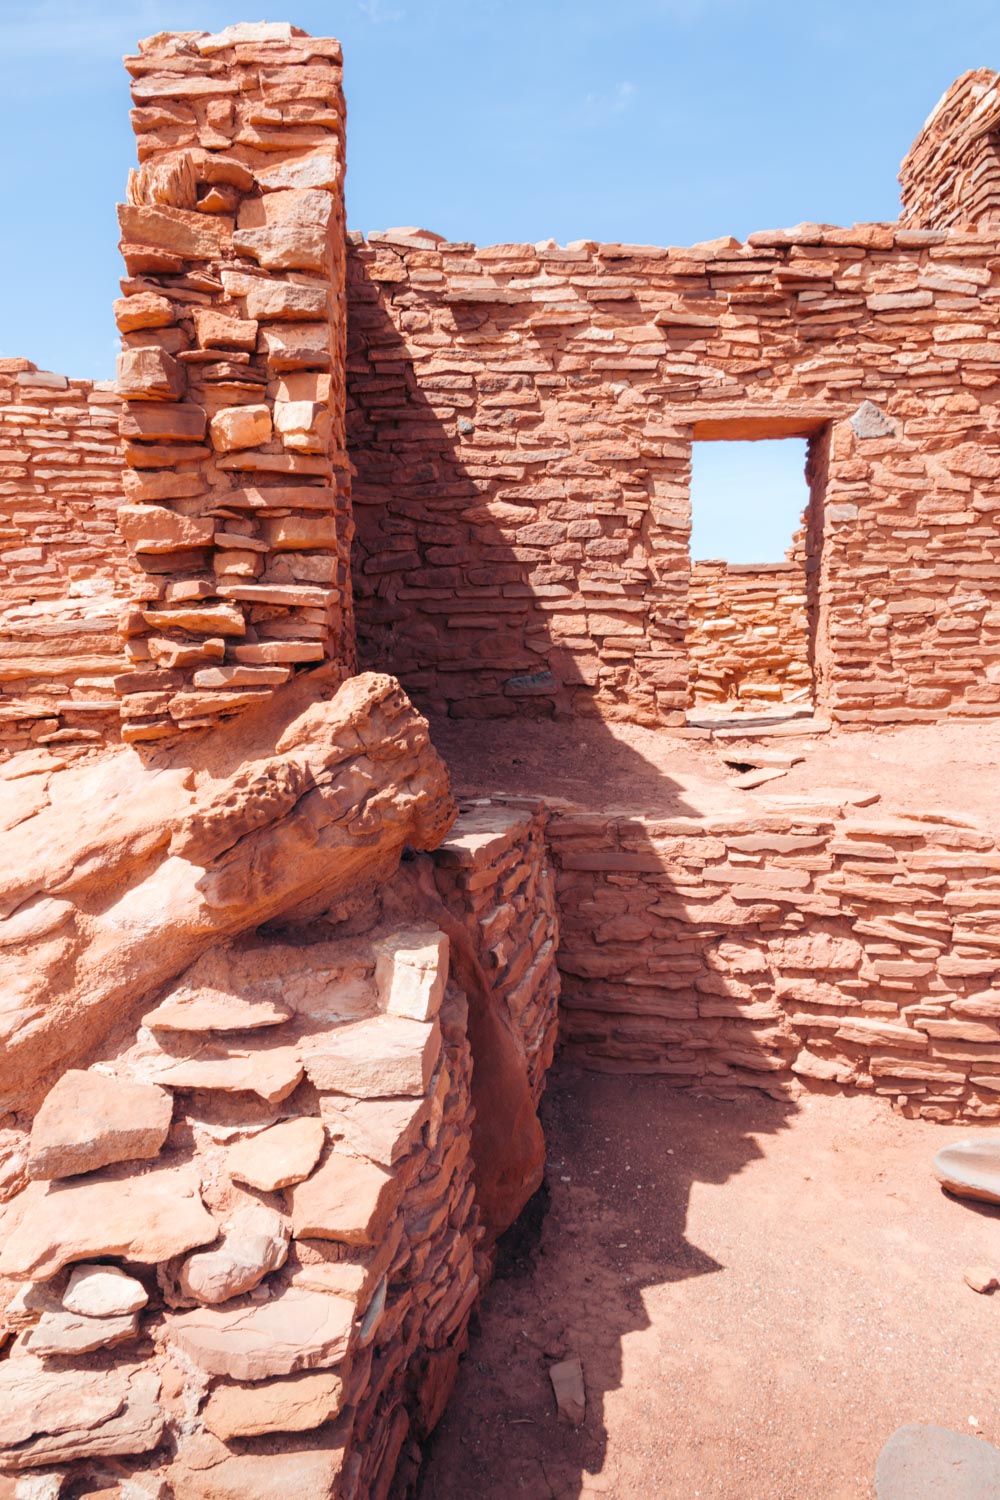 Visiting Wupatki National Monument, ancient dwellings in Arizona - Roads and Destinations.